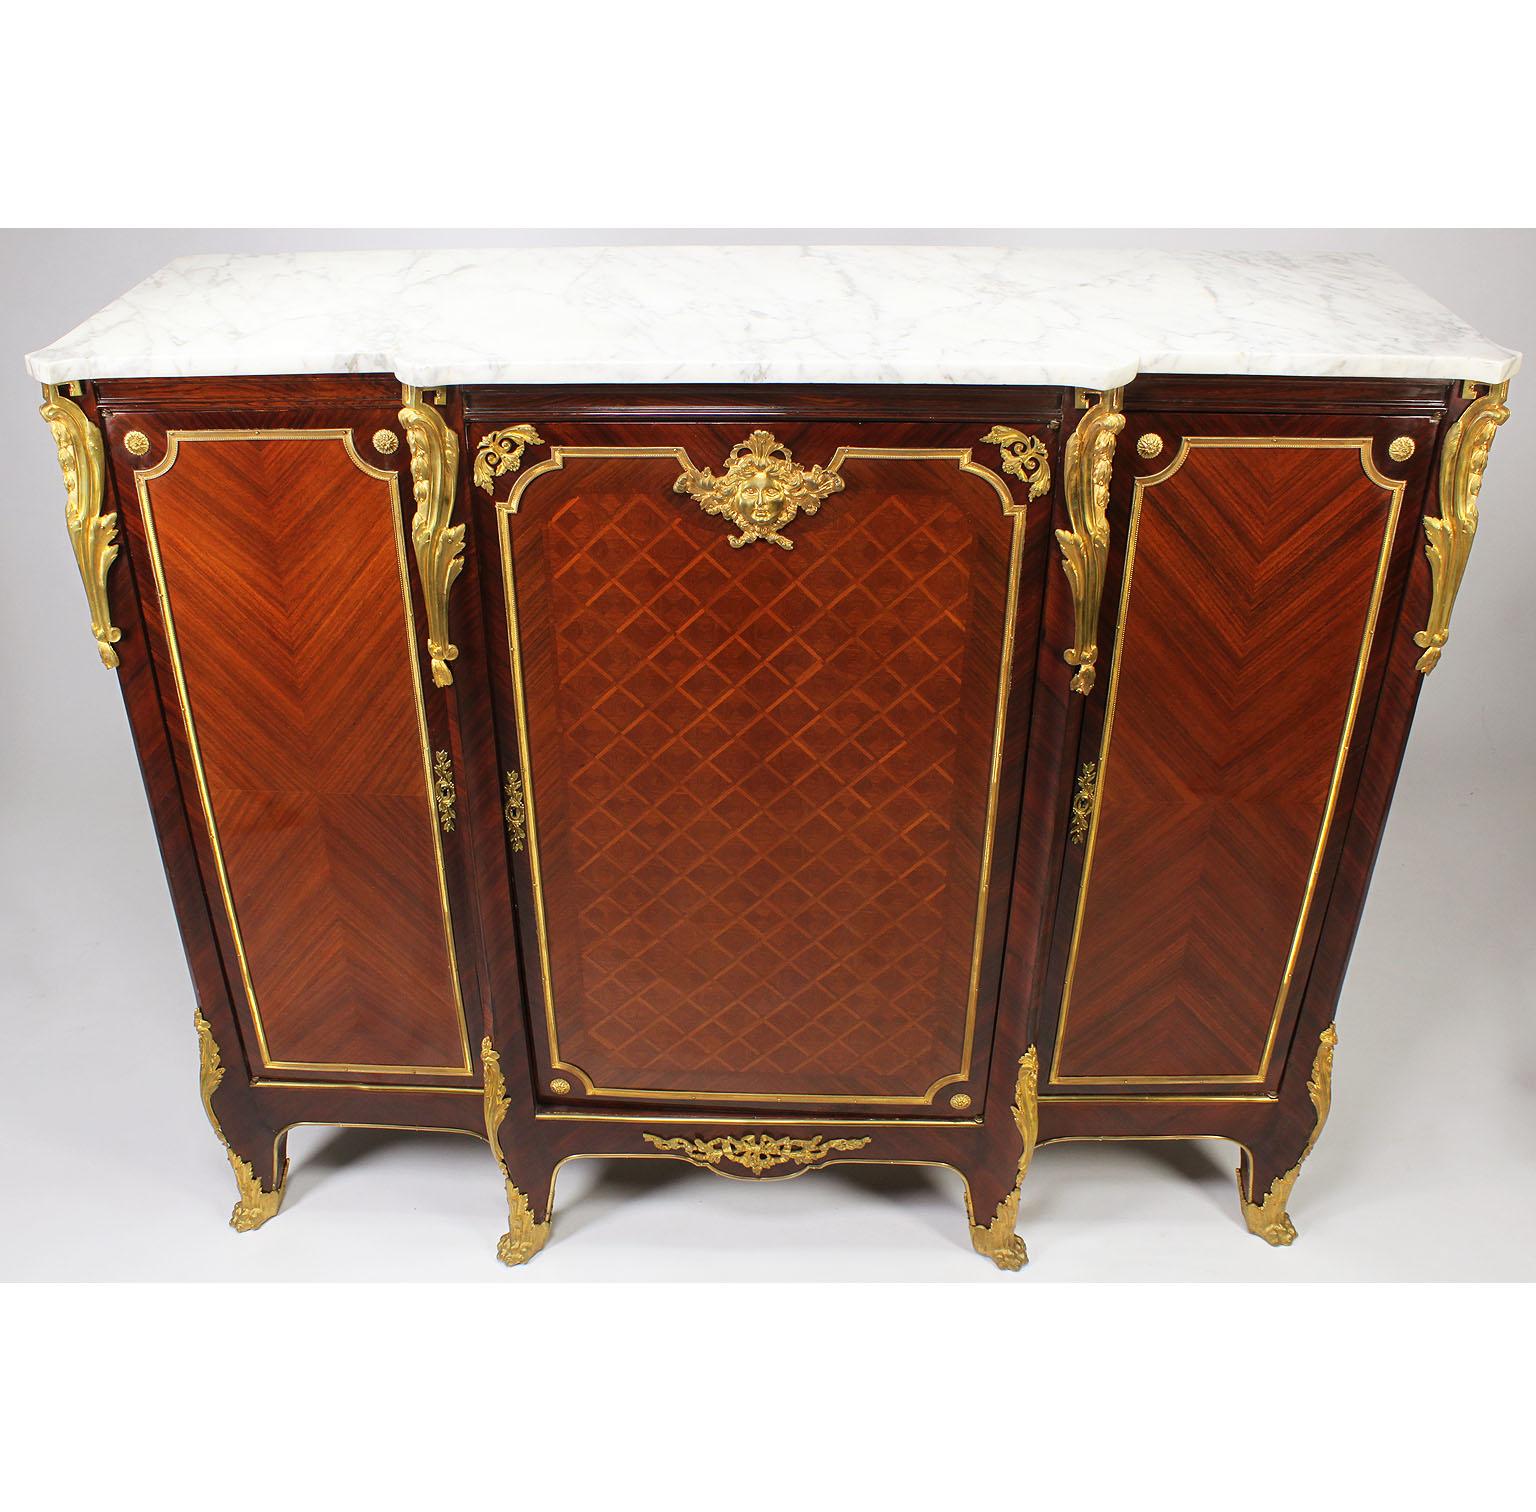 Mahogany French 19th-20th Century Louis XV Style Tulipwood & Gilt-Bronze Mounted Cabinet For Sale